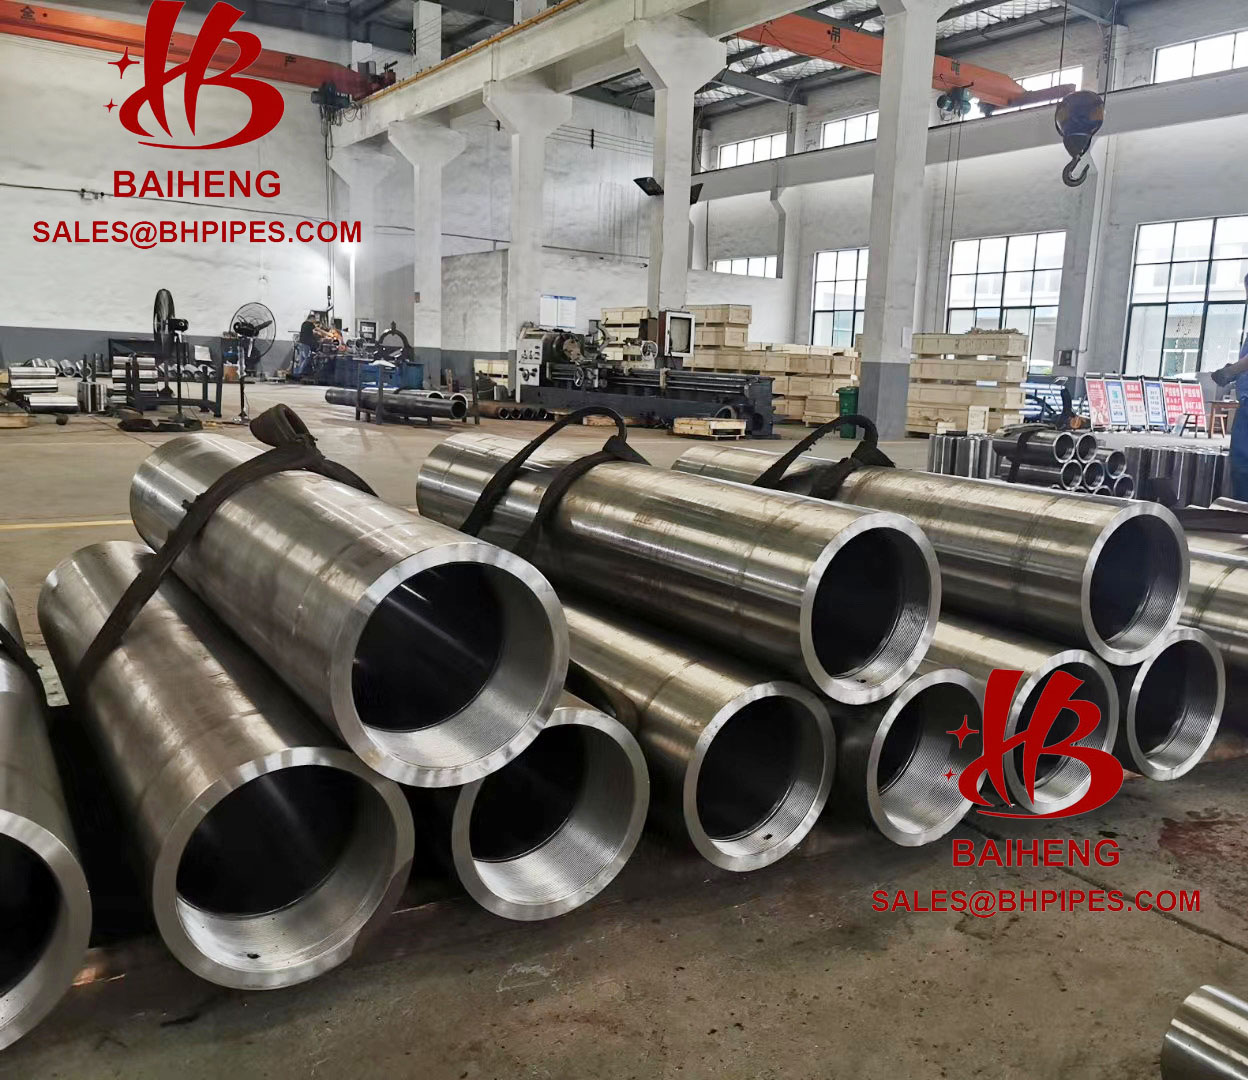 seamless honed pipes for hydraulic cylinder turning and boring pipes3